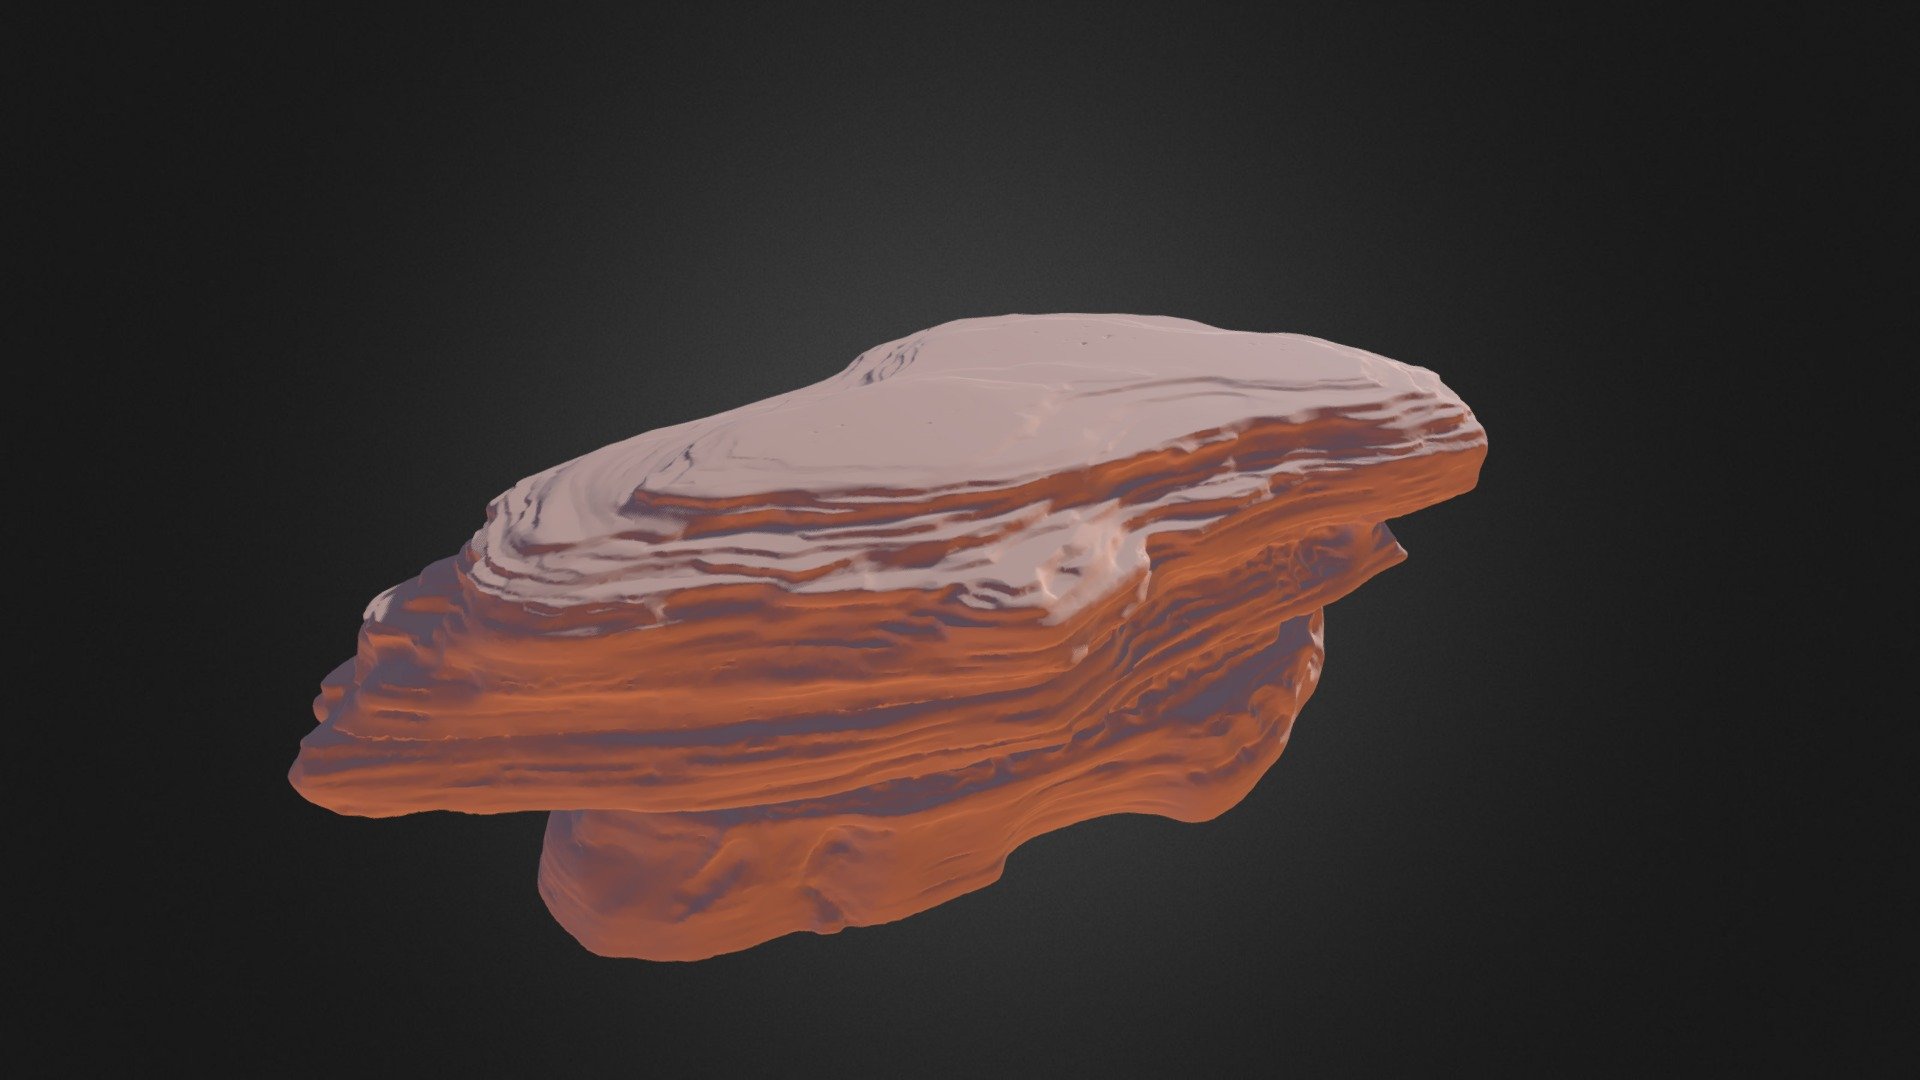 Boulder sculpted in Zbrush. Based on rock formations in Sedona Arizona US. The stone has distinct layers and pitted depressions 3d model